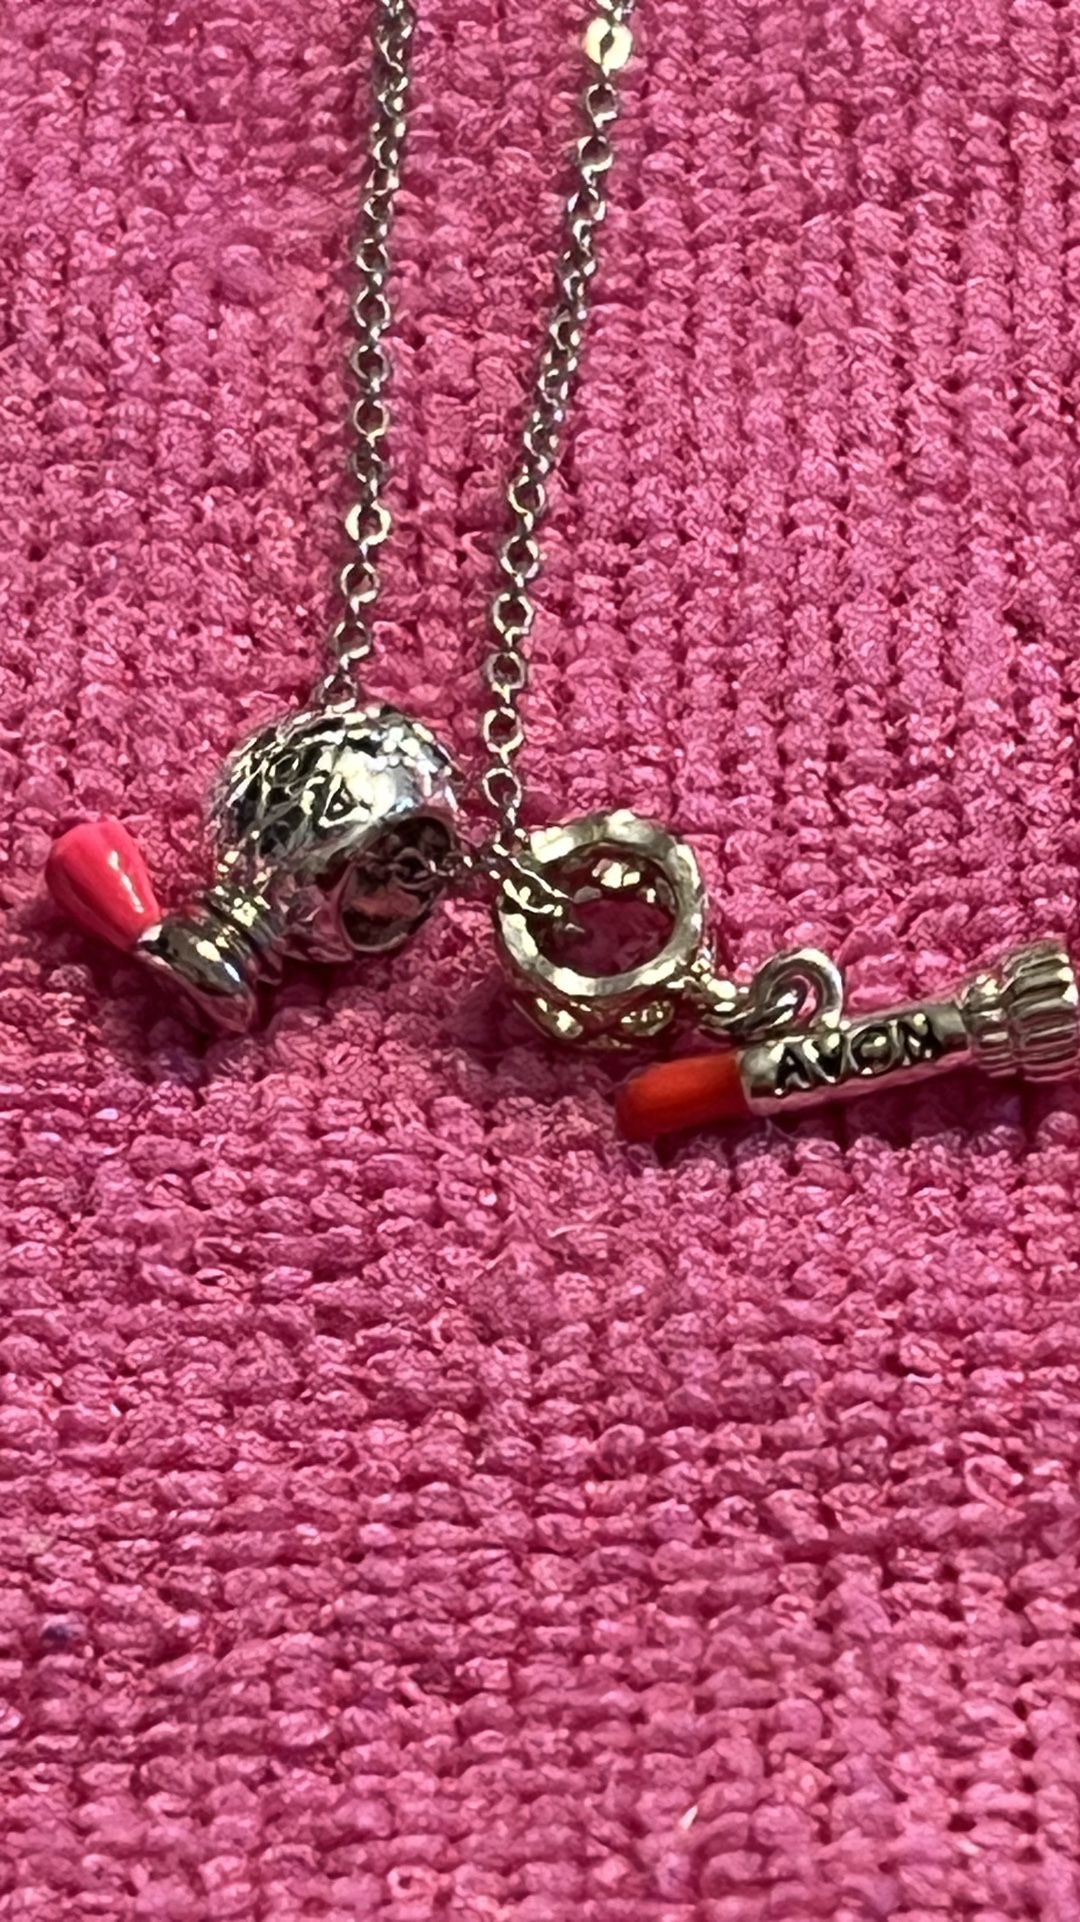 AVON Perfume And lipstick charm Necklace. New never been used 